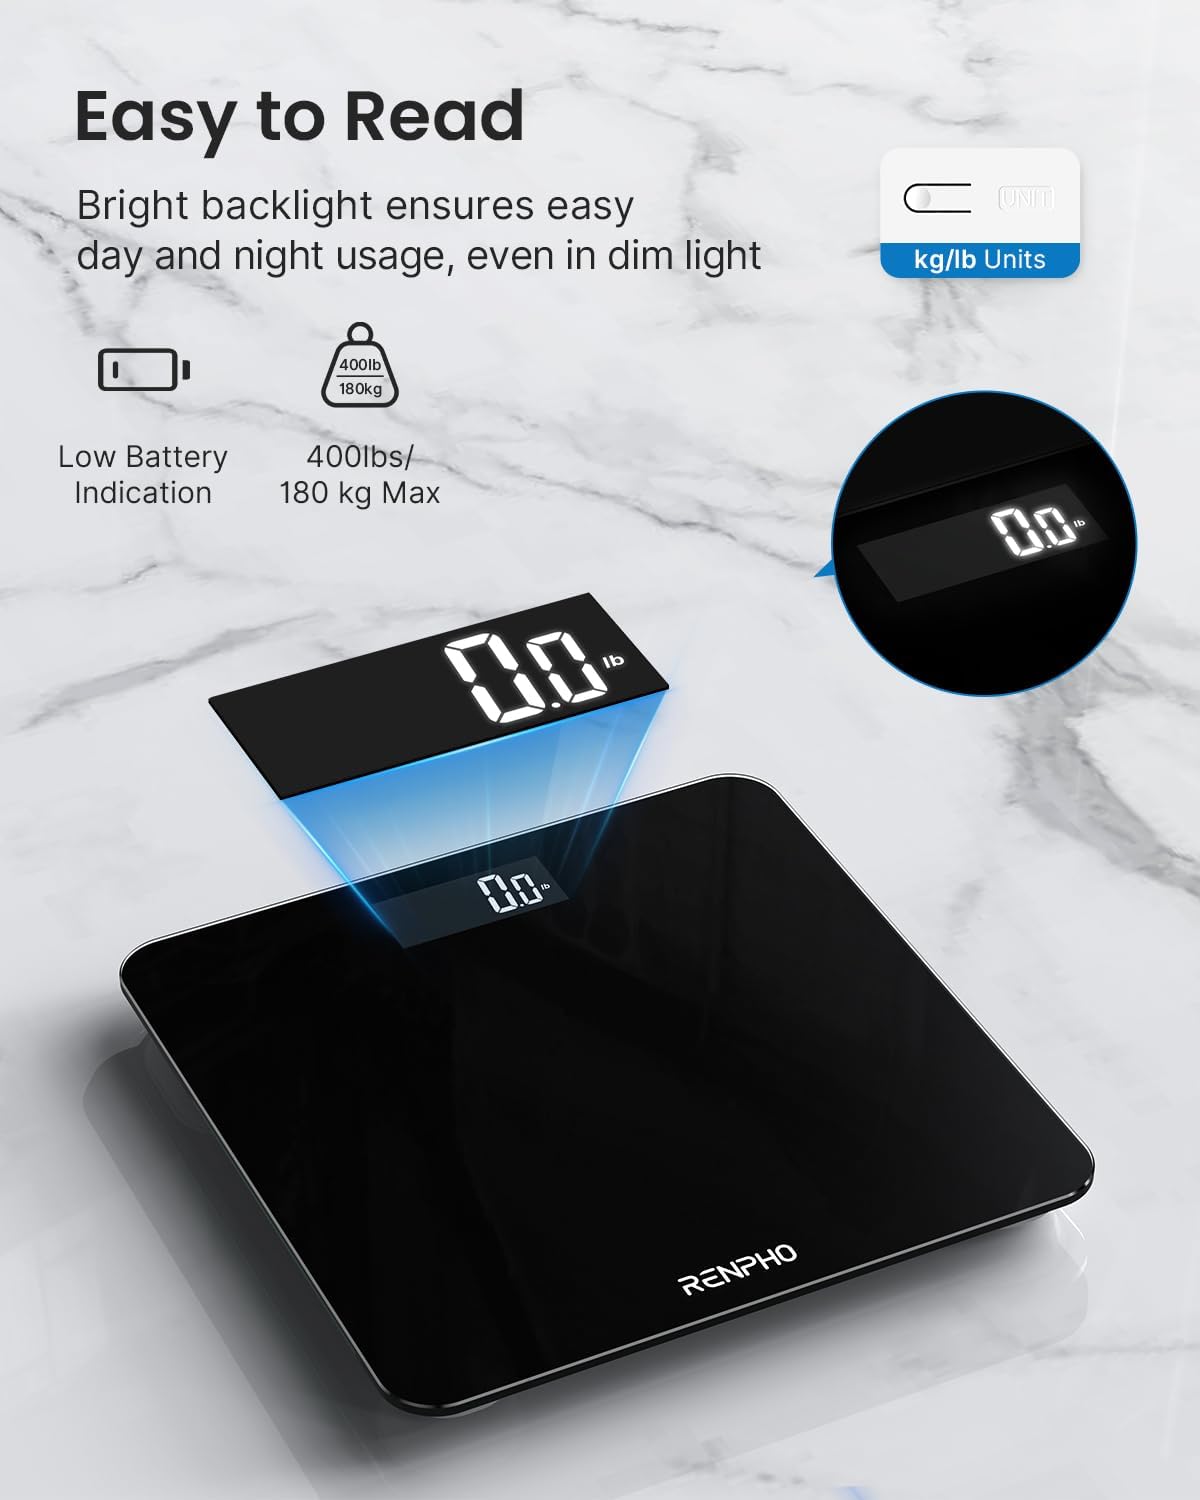 RENPHO Digital Bathroom Scales for Body Weight, Weighing Scale Electronic Bath Scales with High Precision Sensors Accurate Weight Machine for People, LED Display, Step-On, Black, Core 1S